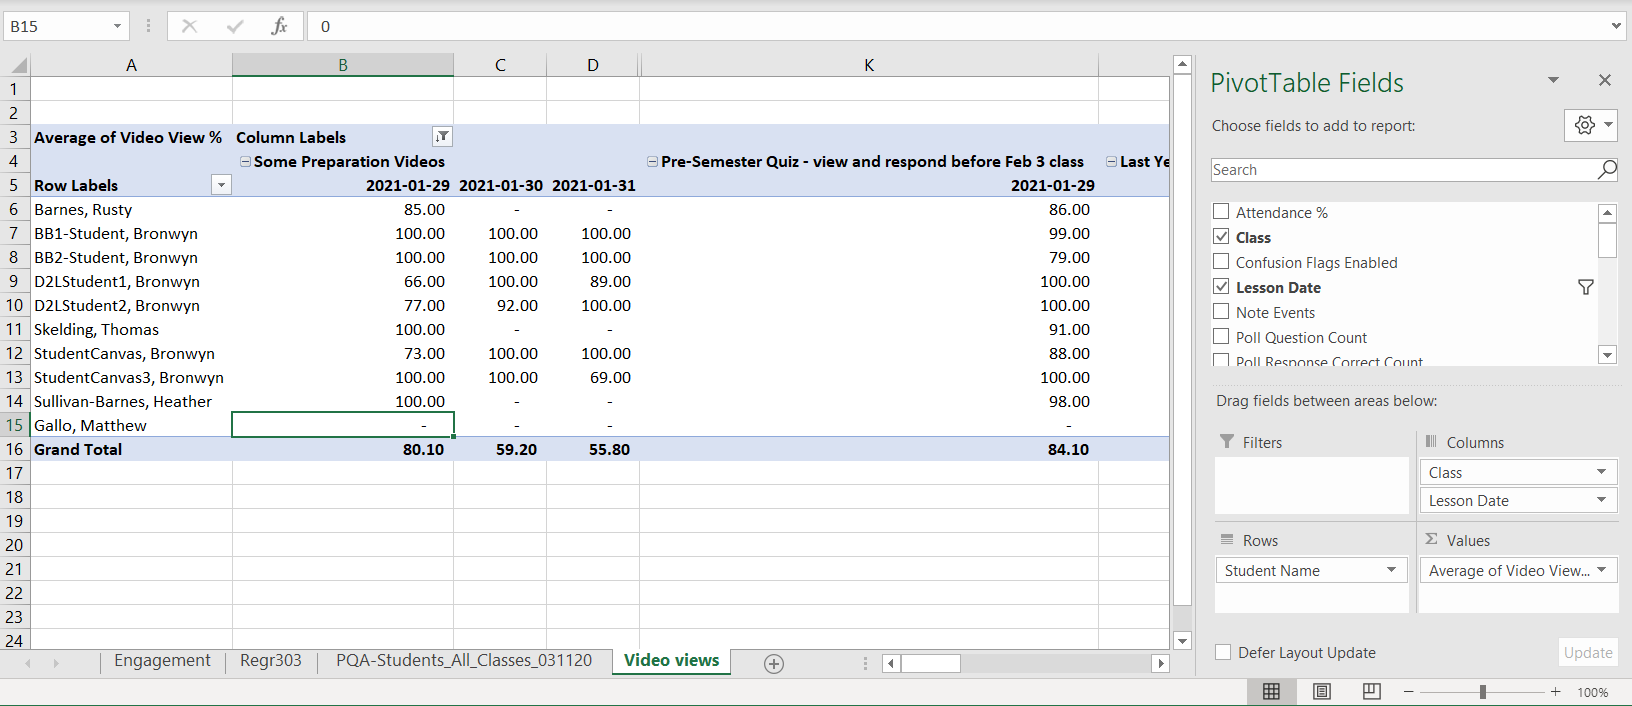 Pivot table with lesson date and class as columns but grouped differently due to field order as described